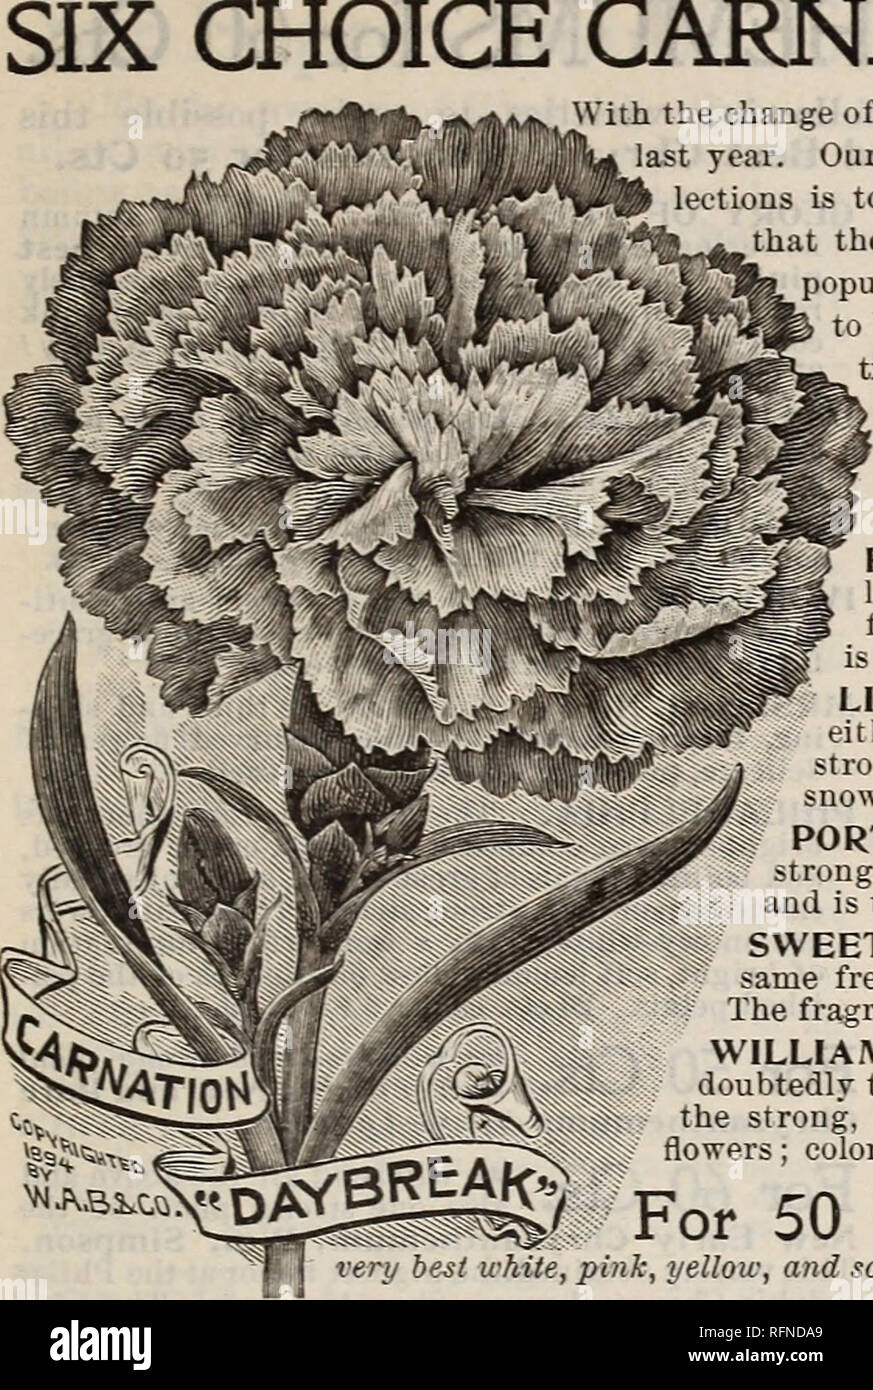 . Burpee's farm annual written at Fordhook Farm. Nurseries (Horticulture) Pennsylvania Philadelphia Catalogs; Vegetables Seeds Catalogs; Plants, Ornamental Catalogs; Flowers Seeds Catalogs. TWELVE CHOICE CARNATIONS. 135. CHOICE CARNATIONS FOR 50 CTS- With the change of one variety, this is the same collection that was so popular t year. Our idea in making up these compact and popular plant col- lections is to select varieties each of which shall be so good and distinct that the purchaser will want them all. The prices also are low aud popular, while the plants are strong and well-rooted, all r Stock Photo